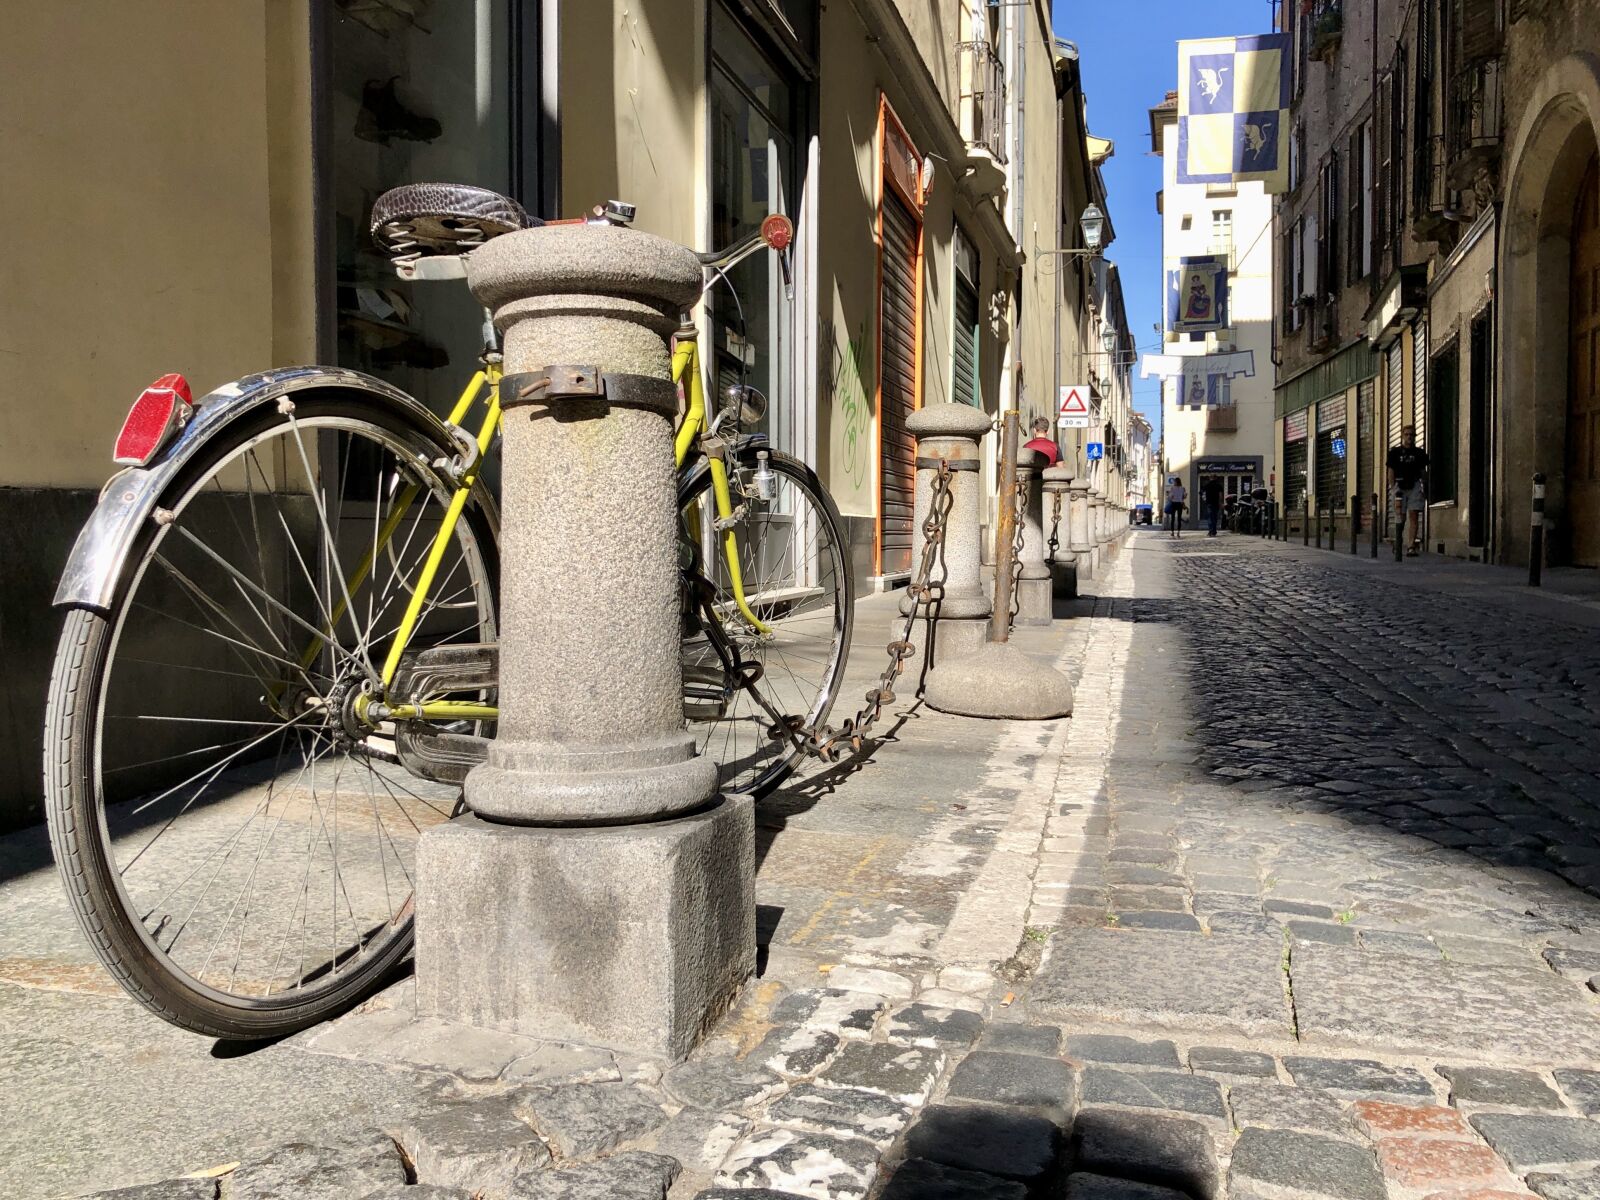 iPhone X back camera 4mm f/1.8 sample photo. Wheel, alley, road photography